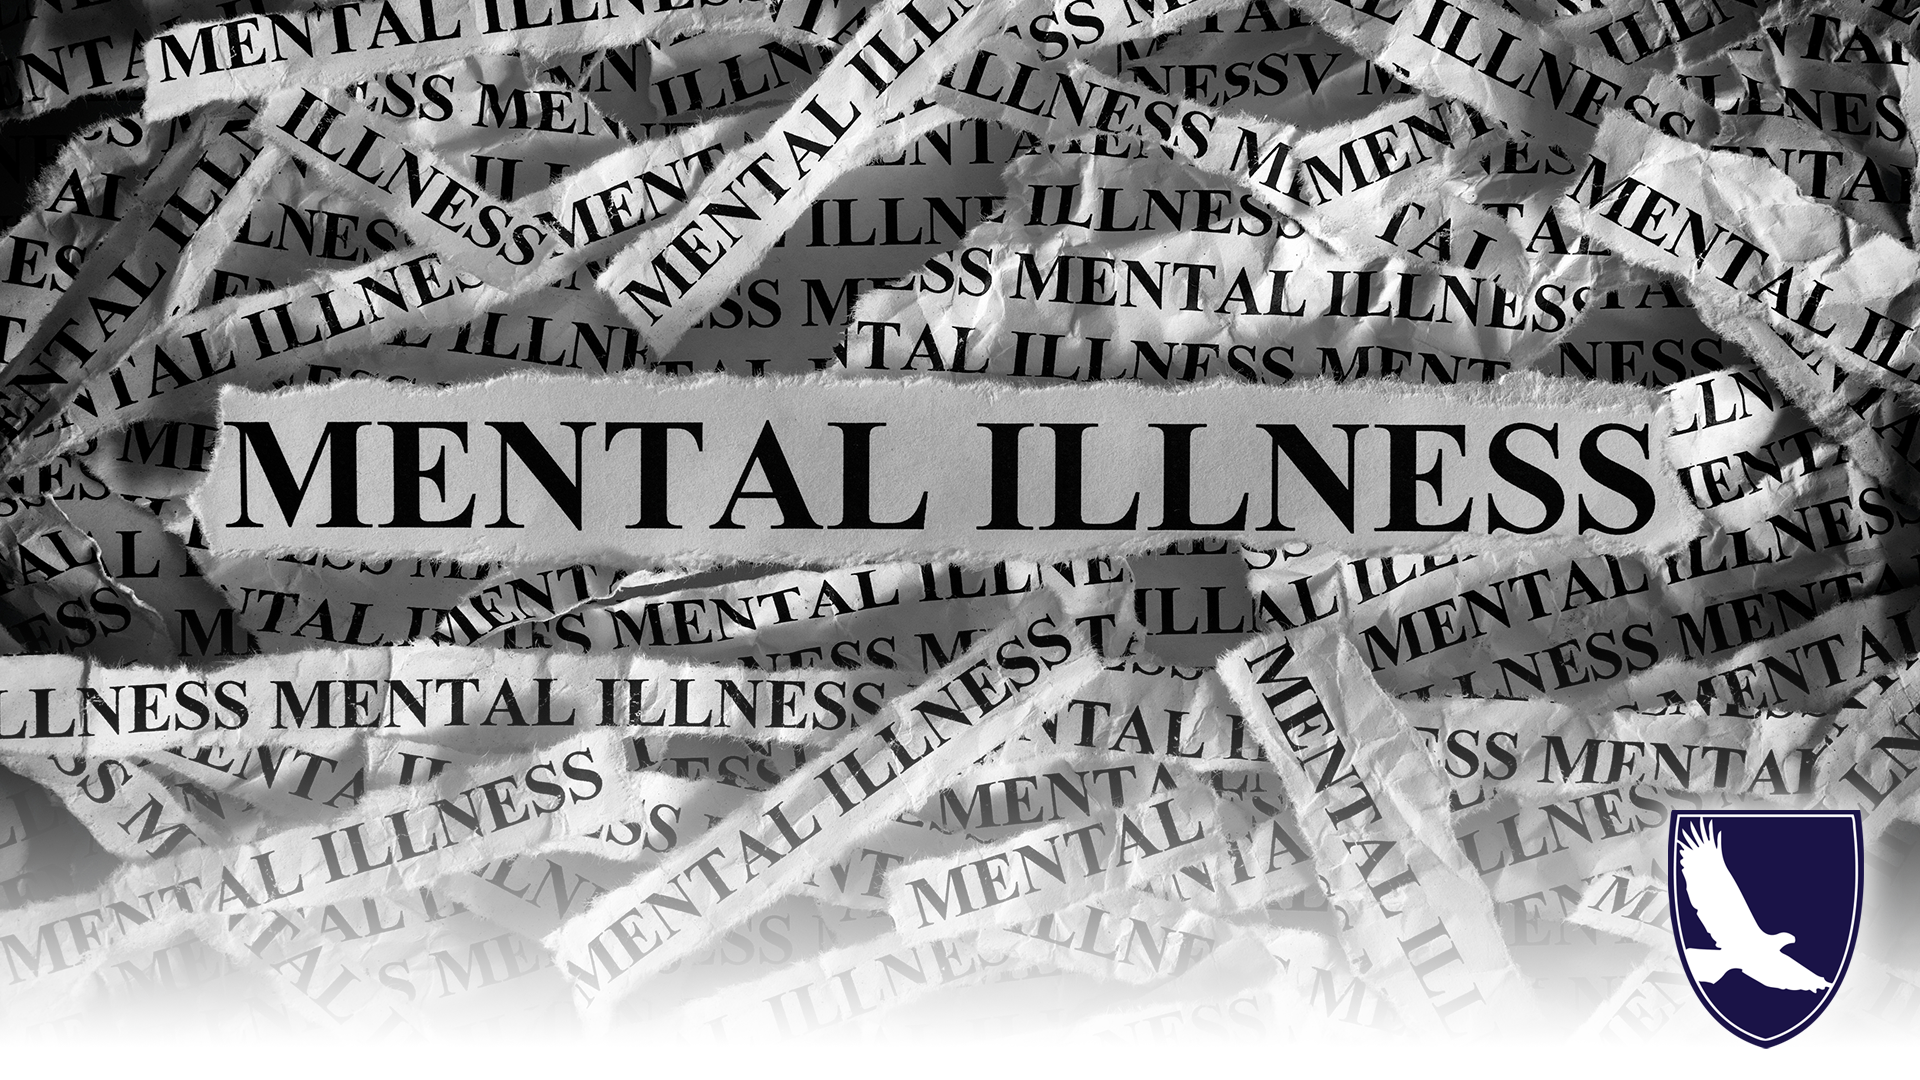 CAN I GET SOCIAL SECURITY DISABILITY SSDI FOR MENTAL ILLNESS